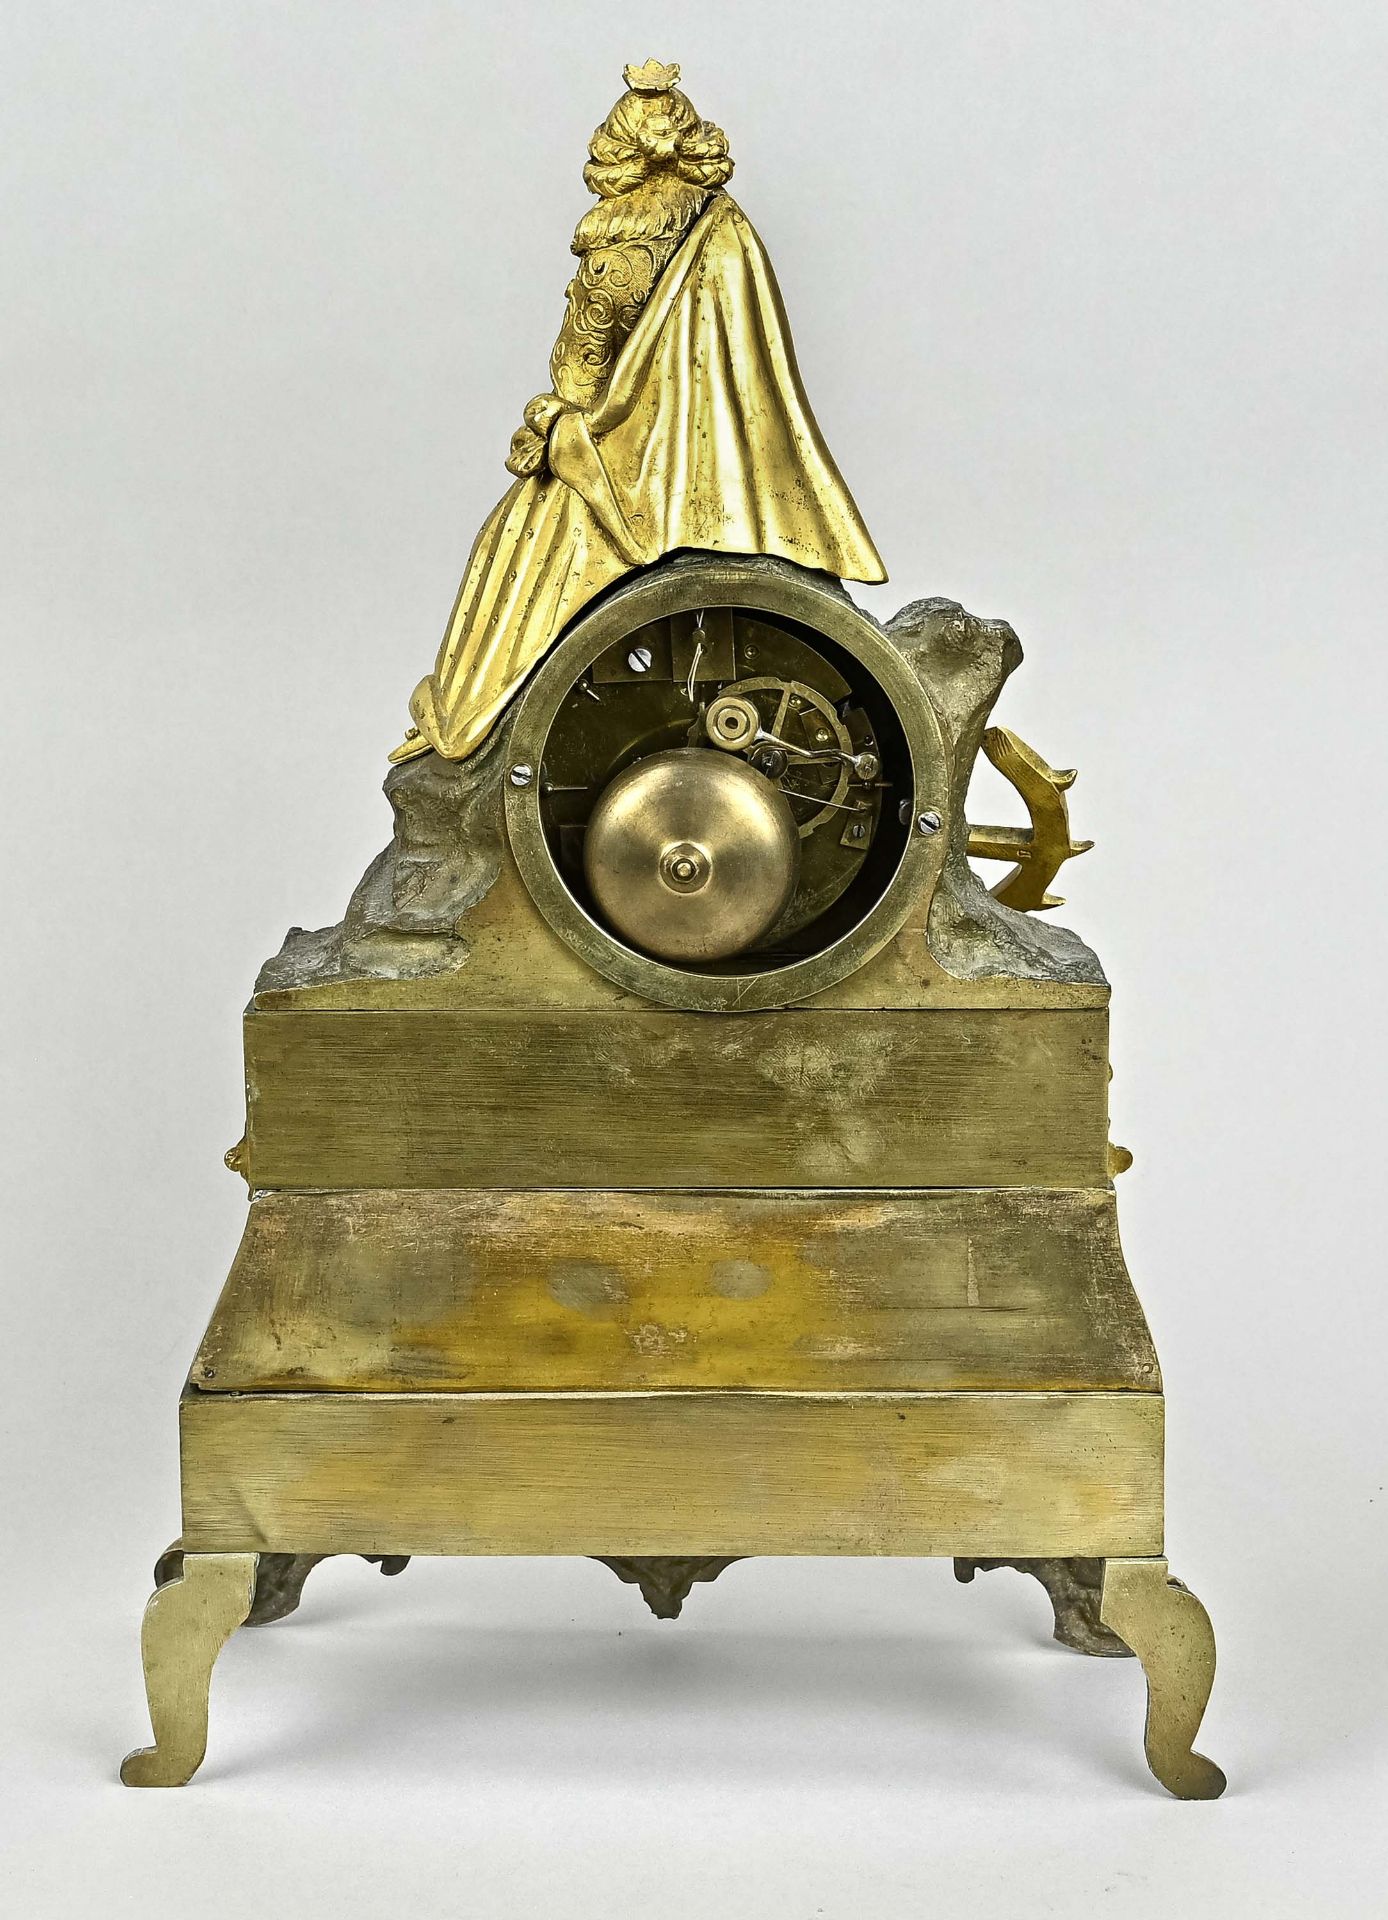 Fireplace clock, France circa 1830/40, bronze, fire gilded, "Muse sitting on rock", thread suspensi - Image 4 of 5